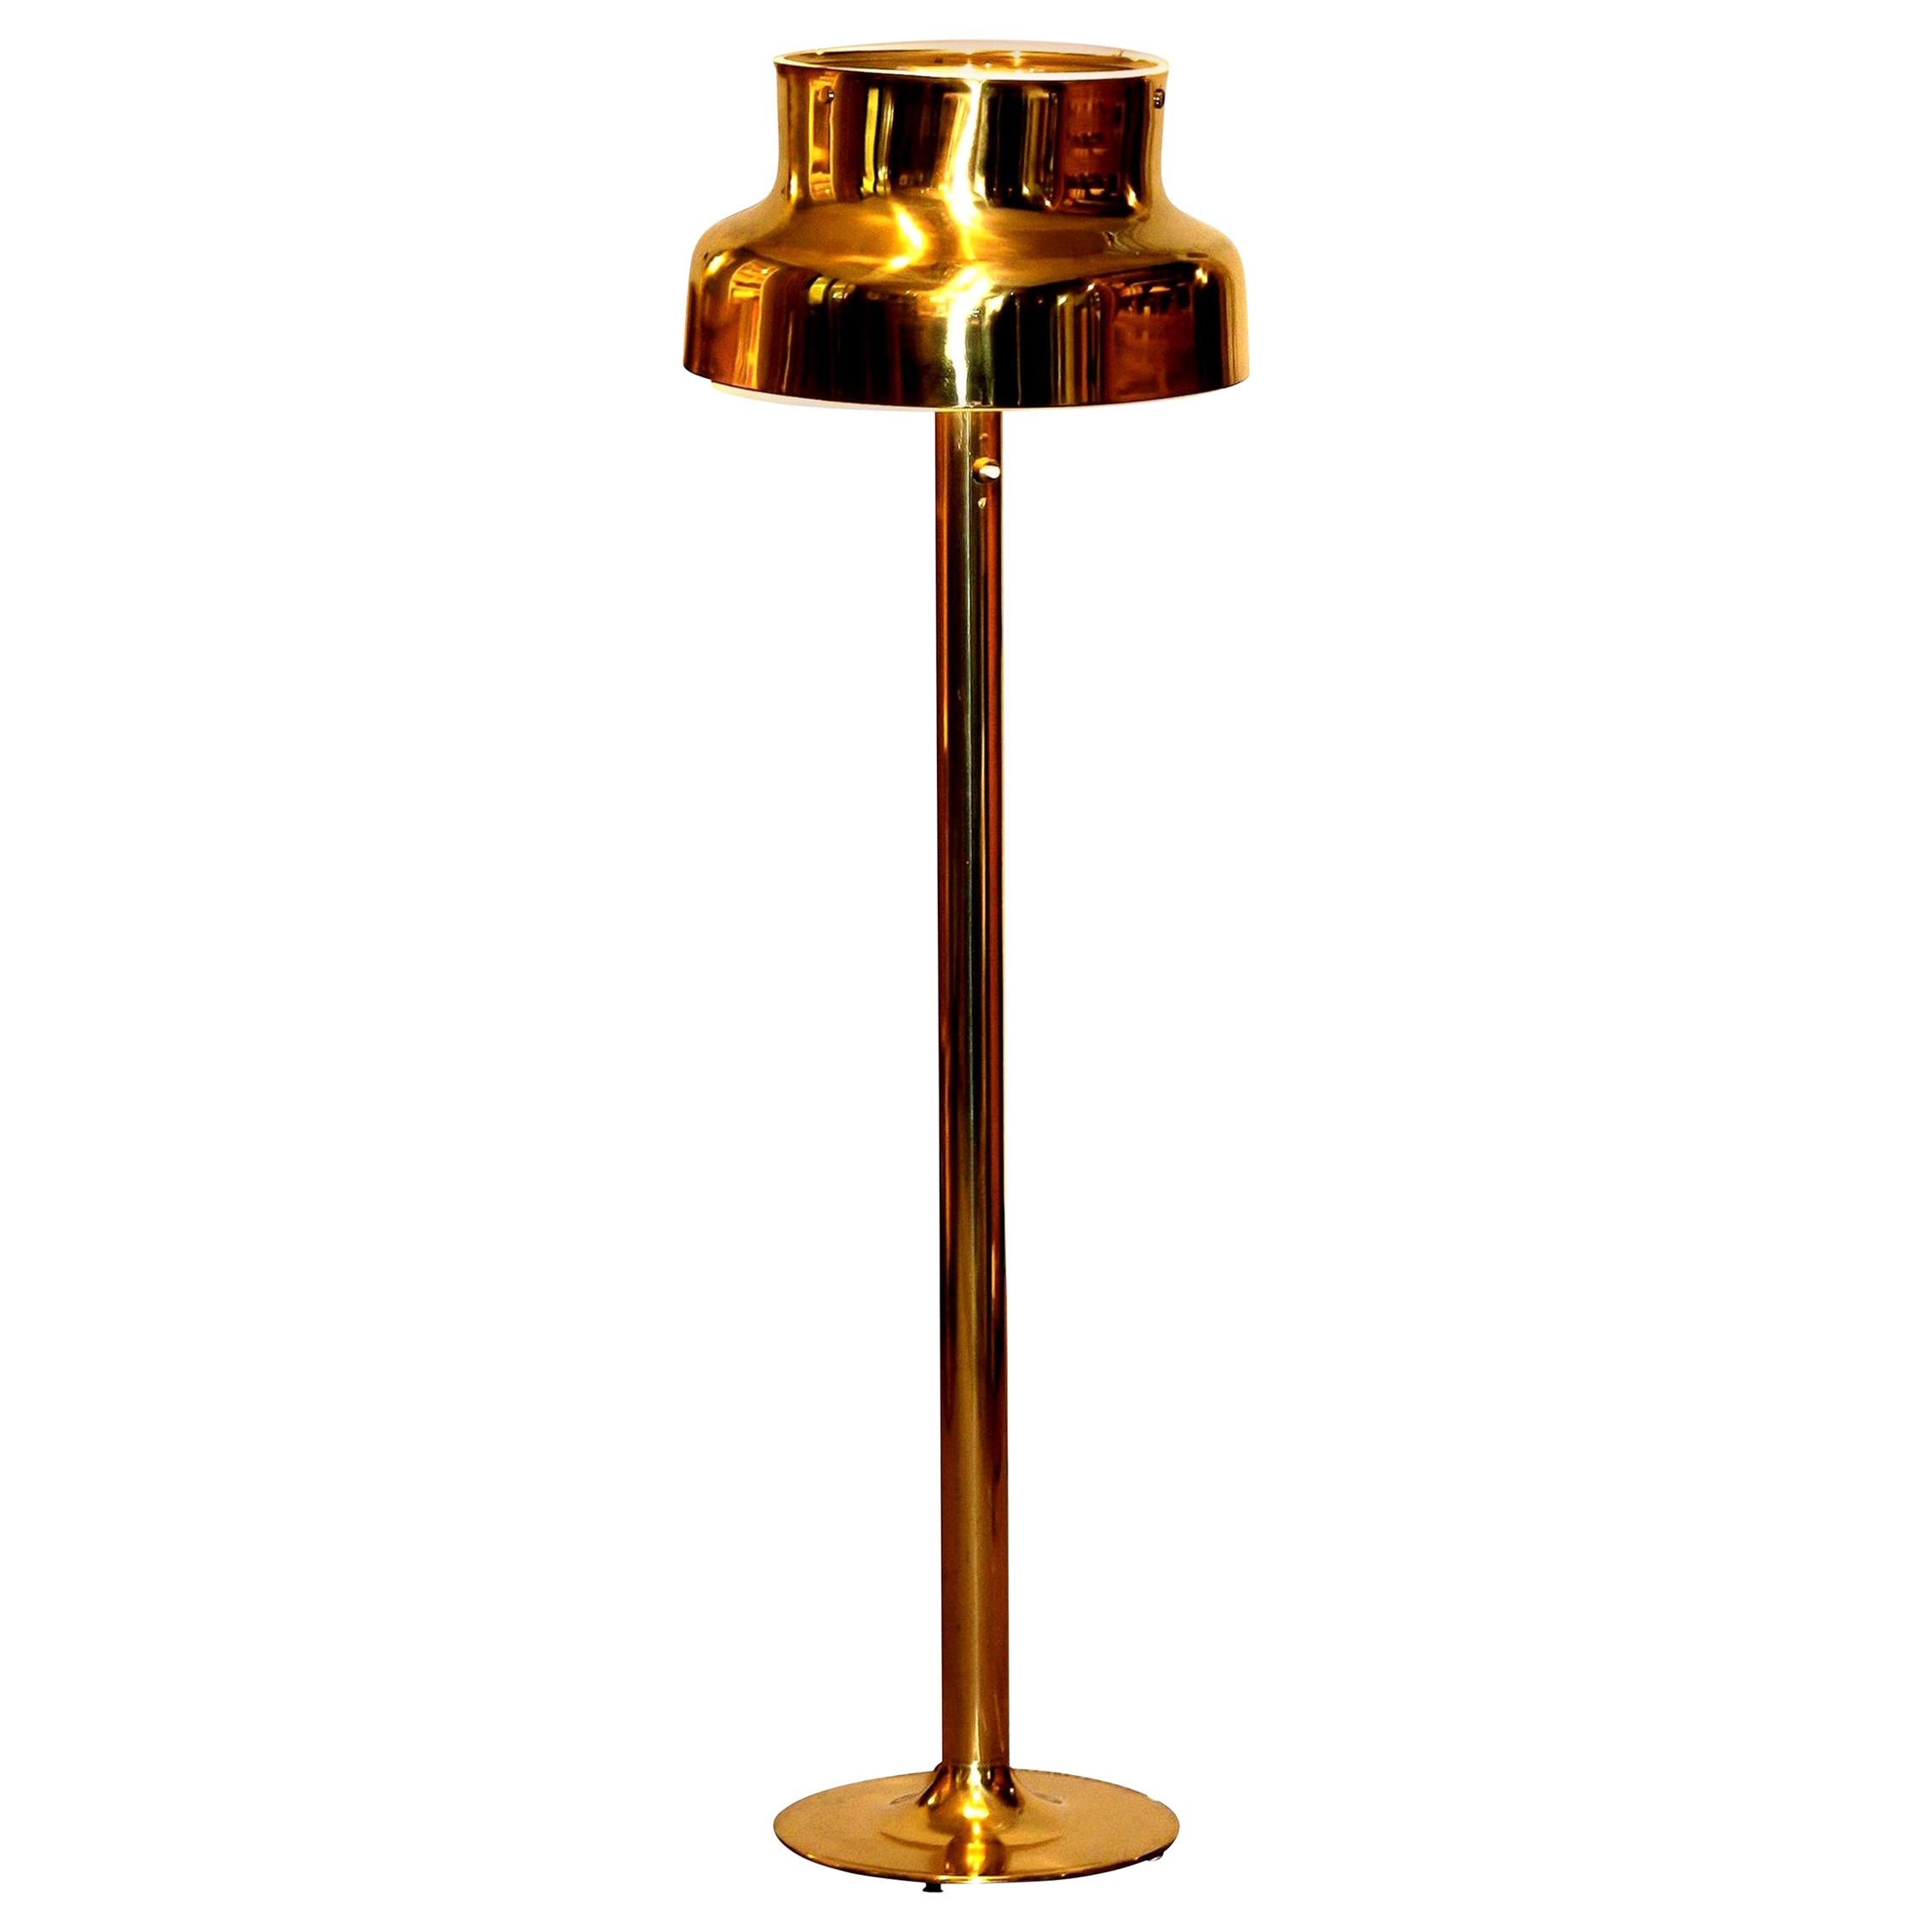 1960s Golden or Brass Floor Lamp by Anders Pehrson ‘Bumling’ for Ateljé Lyktan